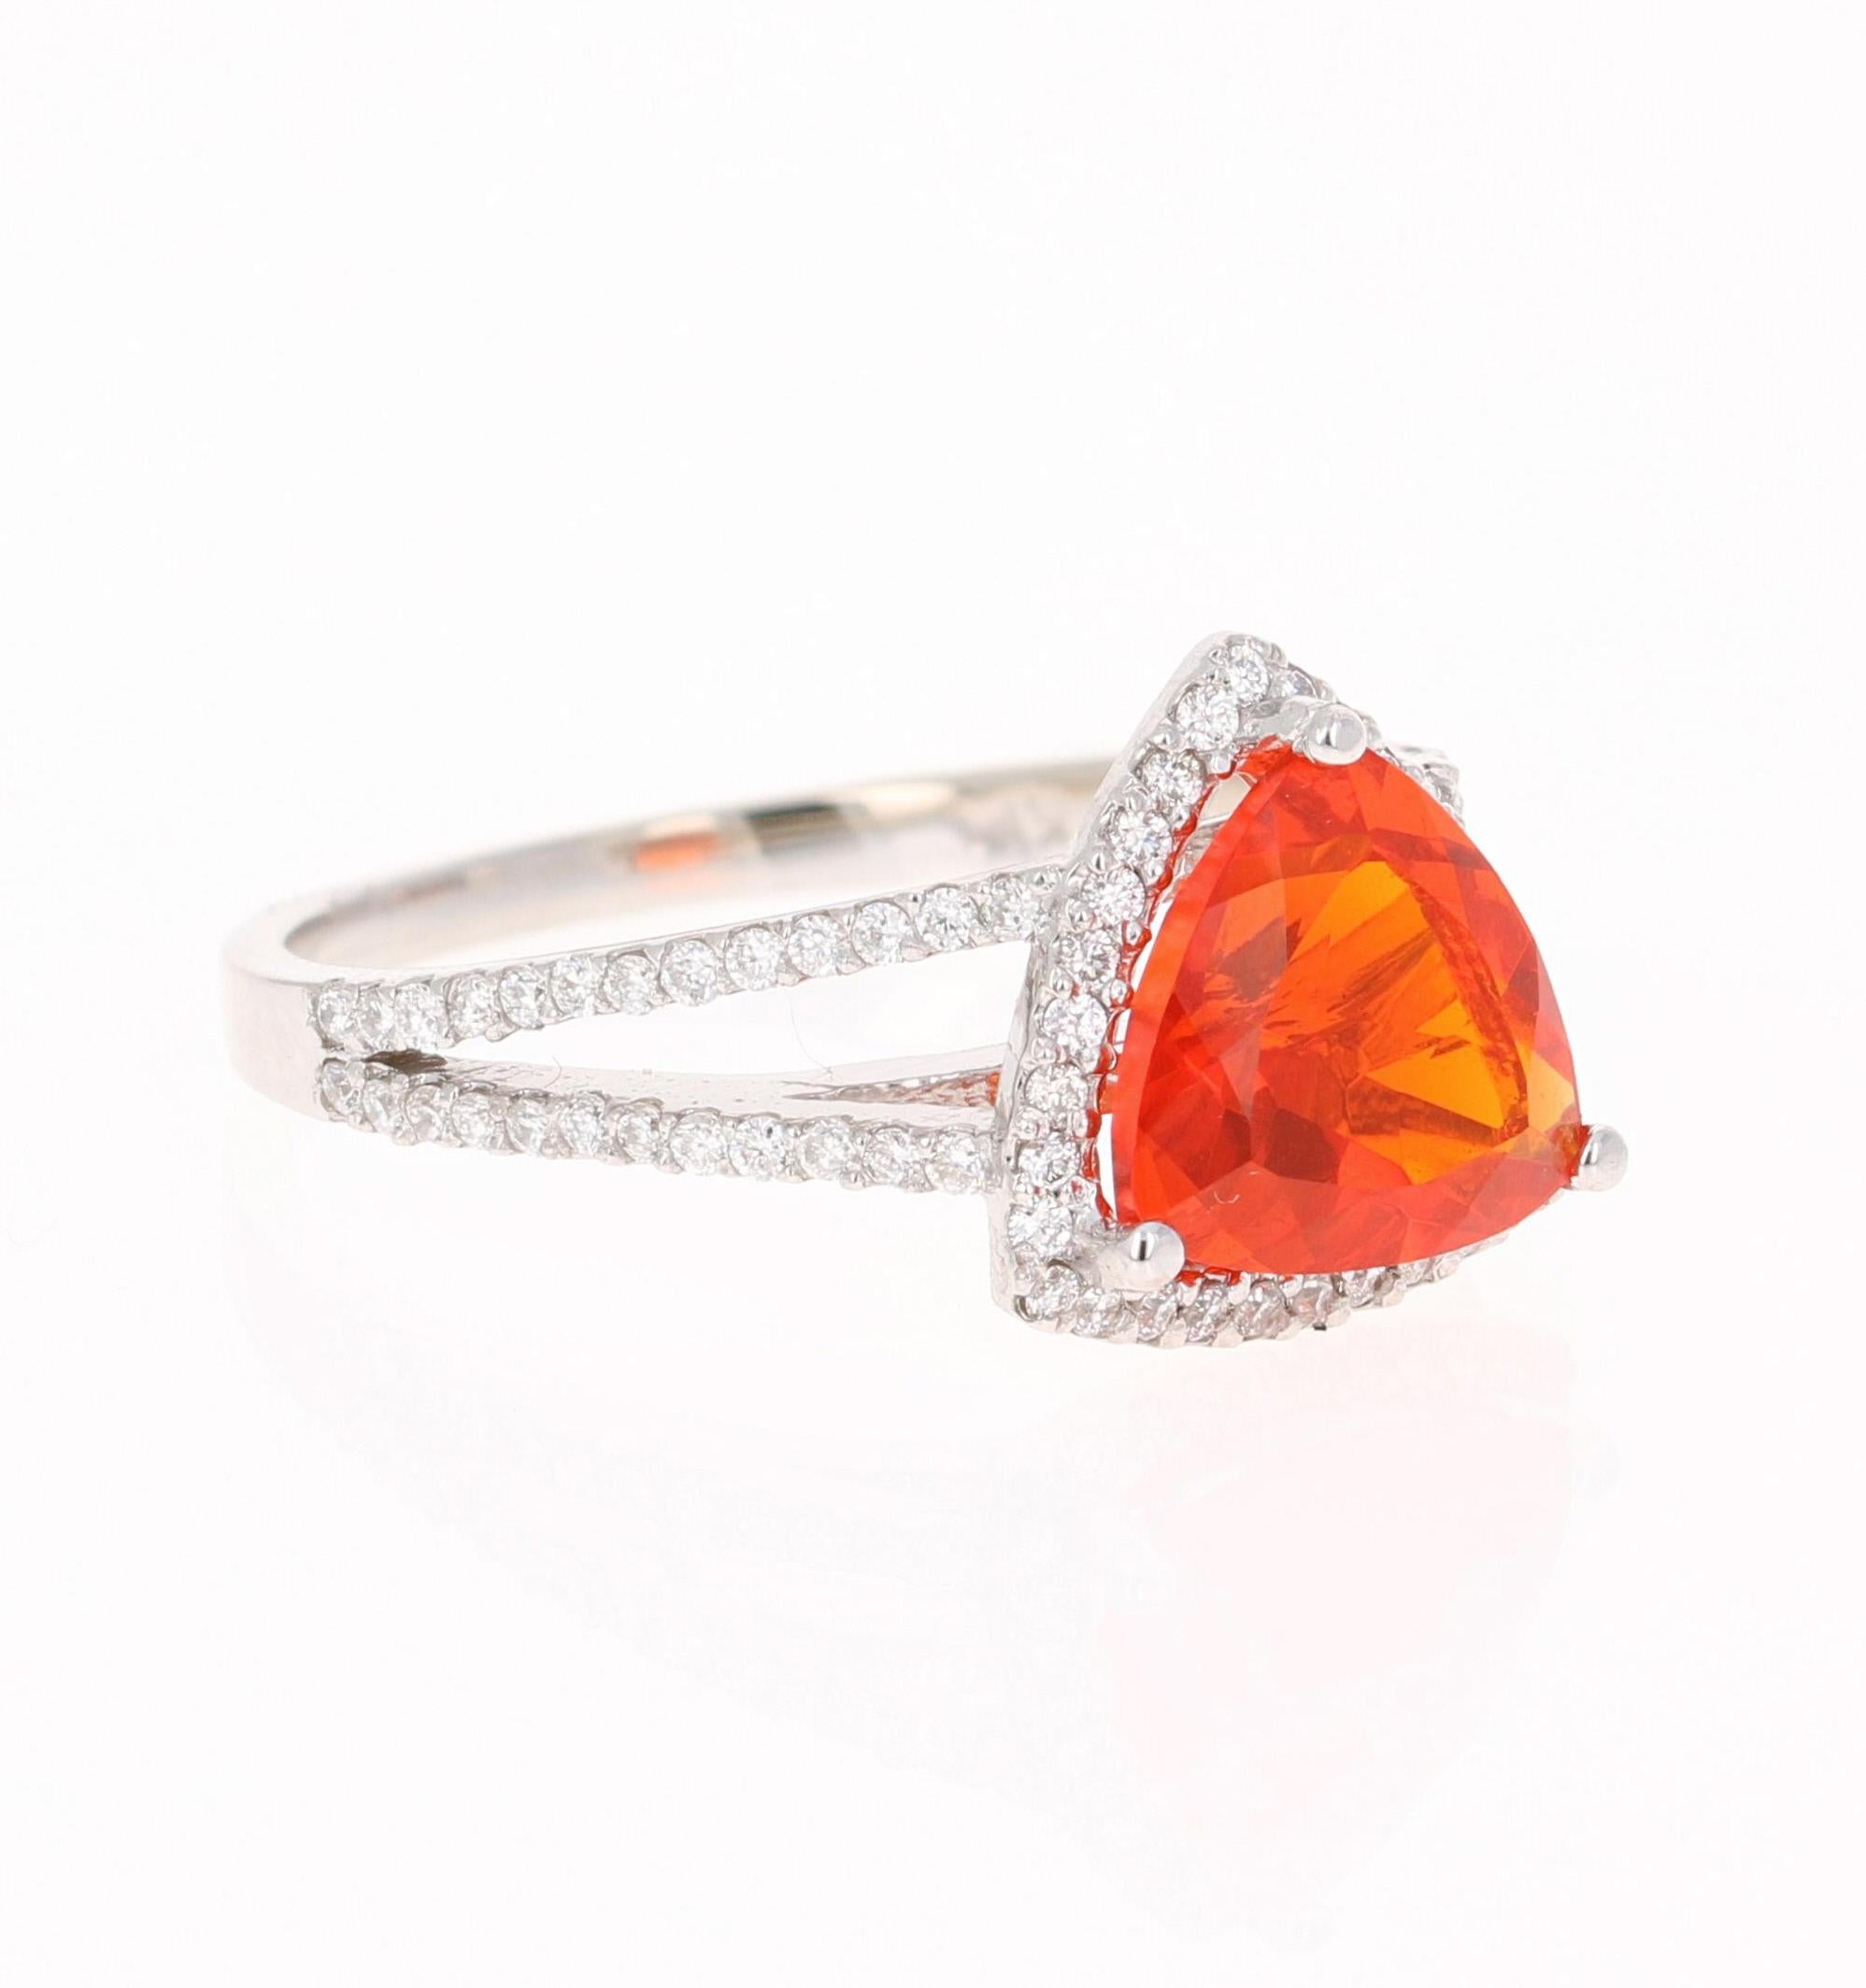 Beautiful Fire Opal and Diamond Ring!

This ring has a 1.69 carat Trillion Cut Fire Opal in the center of the ring.  The Fire Opal is surrounded by a simple Halo of 81 Round Cut Diamonds that weigh 0.40 carats (Clarity: VS, Color: F). 
The total